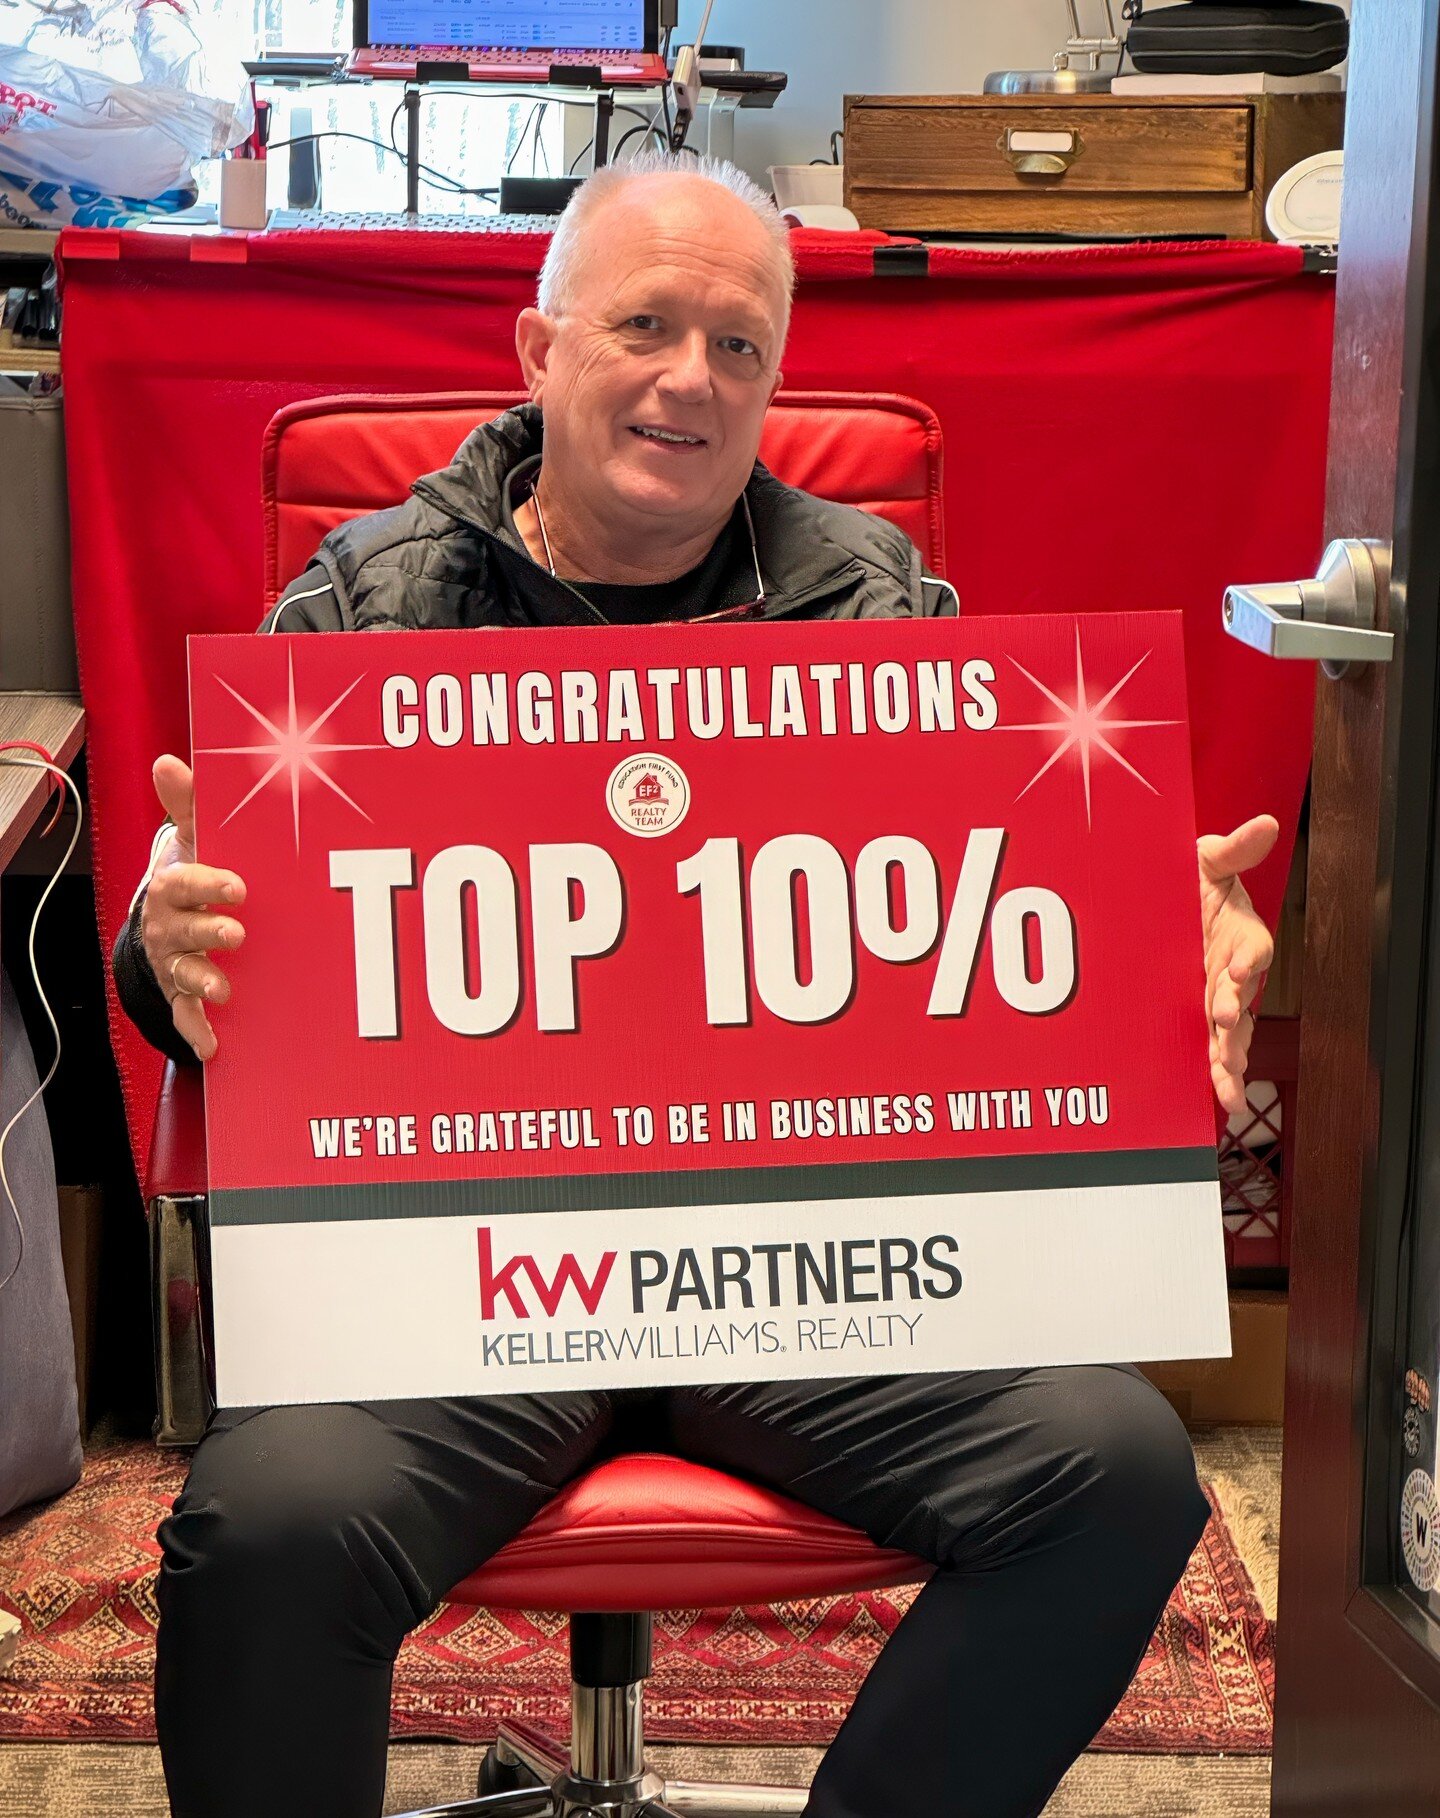 Congrats to Dr. Keith on being in the TOP 10% of agents!

#kellerwilliamsrealty #kellerwilliamsagent #kellerwilliamsrealtor #kellerwiliamswoodstock #woodstockrealestate #cherokeecountyrealestate
#cherokeecountyrealtor #acworthrealestate #woodstockrea